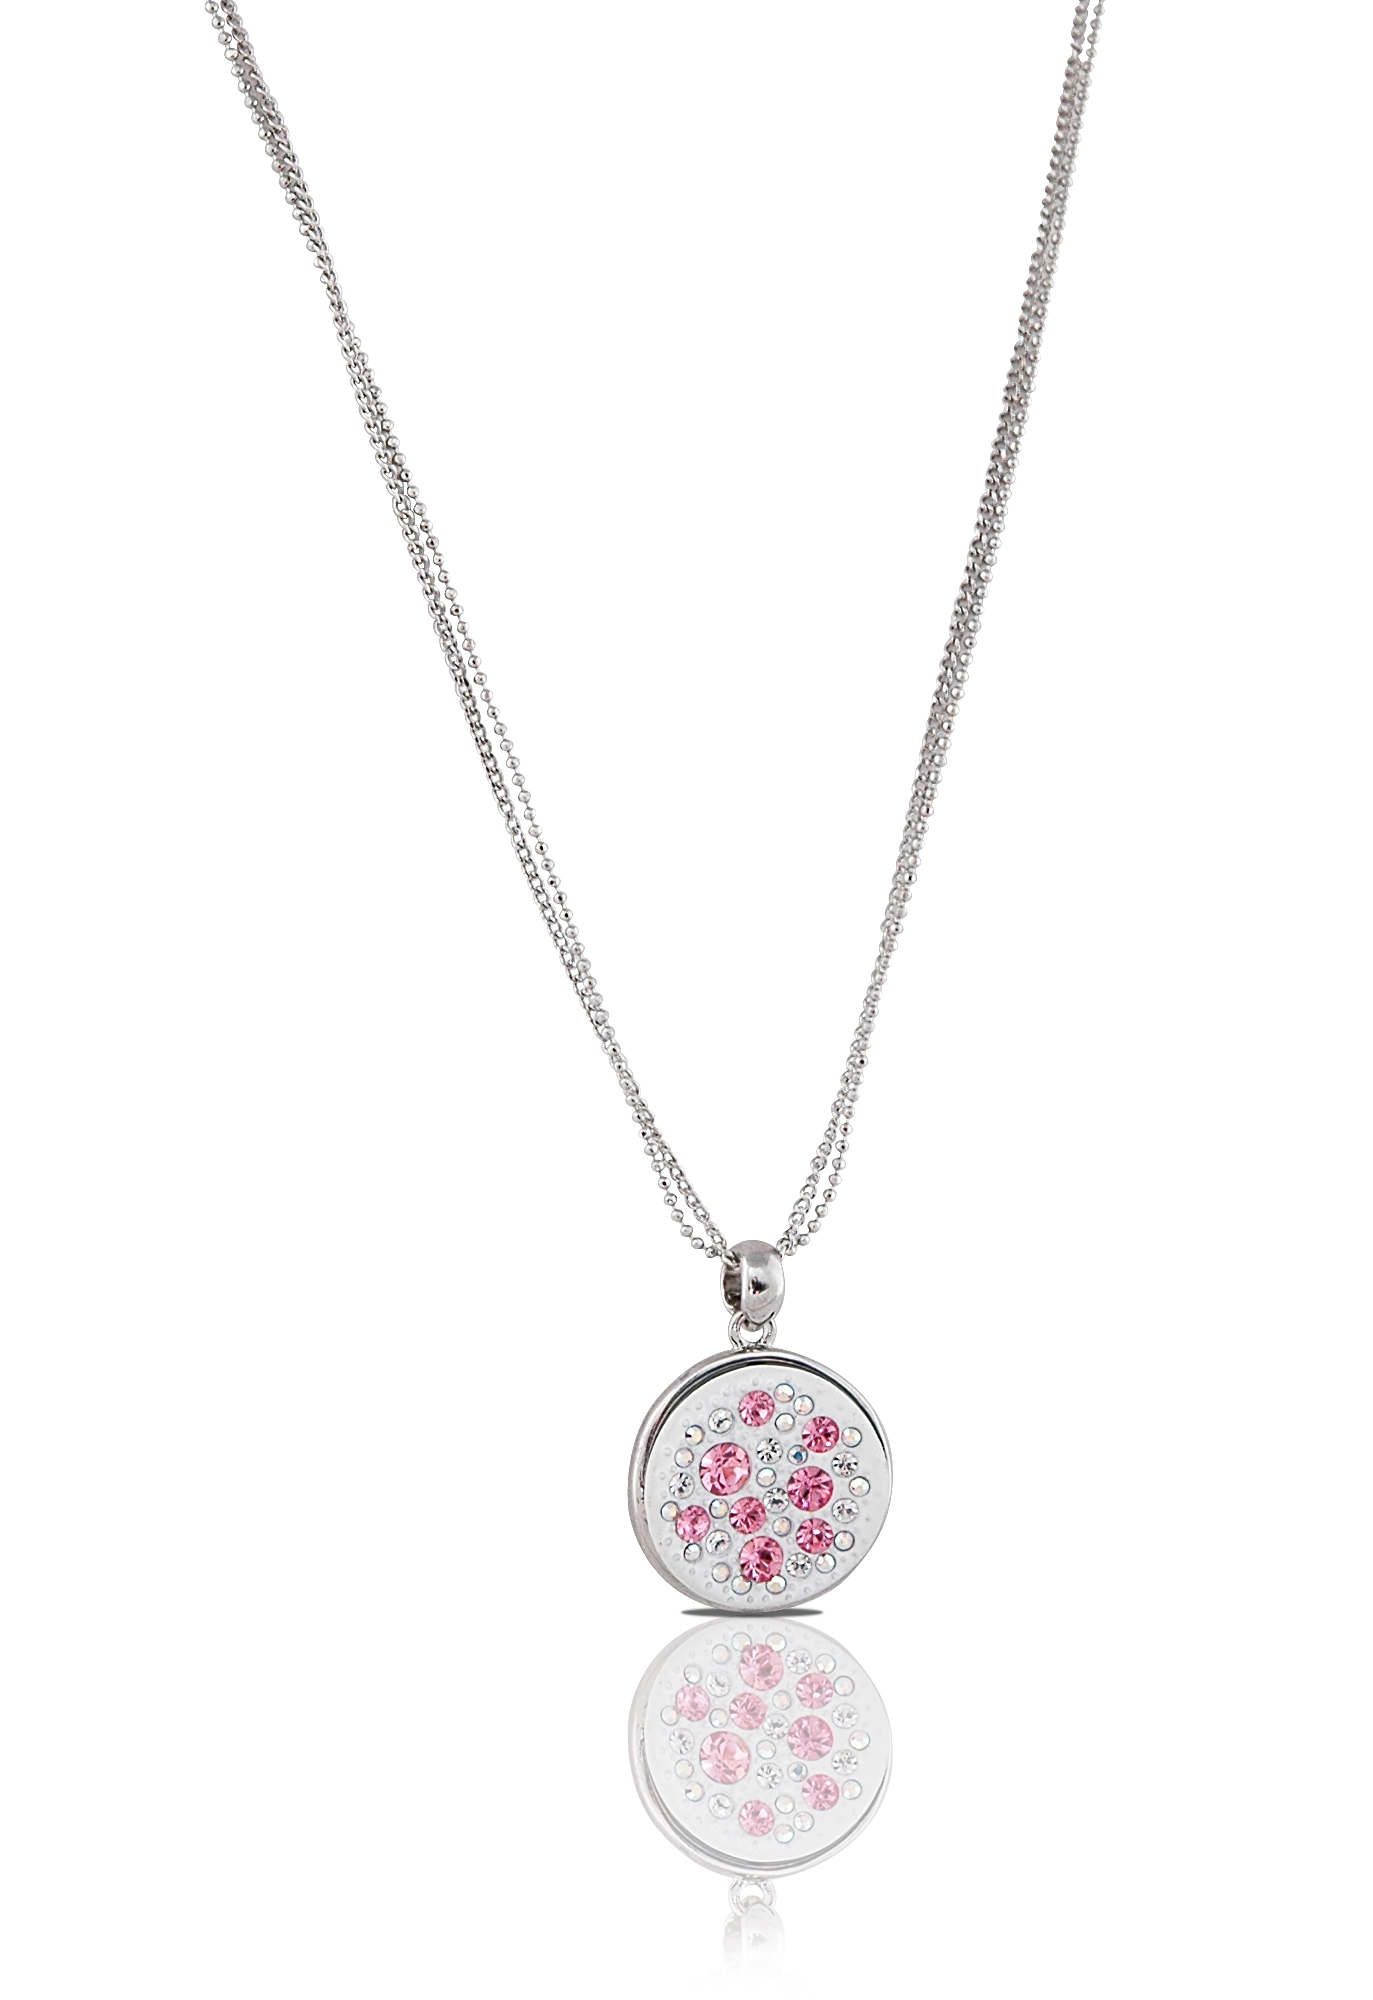 jewelry necklaces pink astonishing crystal cirque charm pendant jewelry necklace ... IPPRAQH